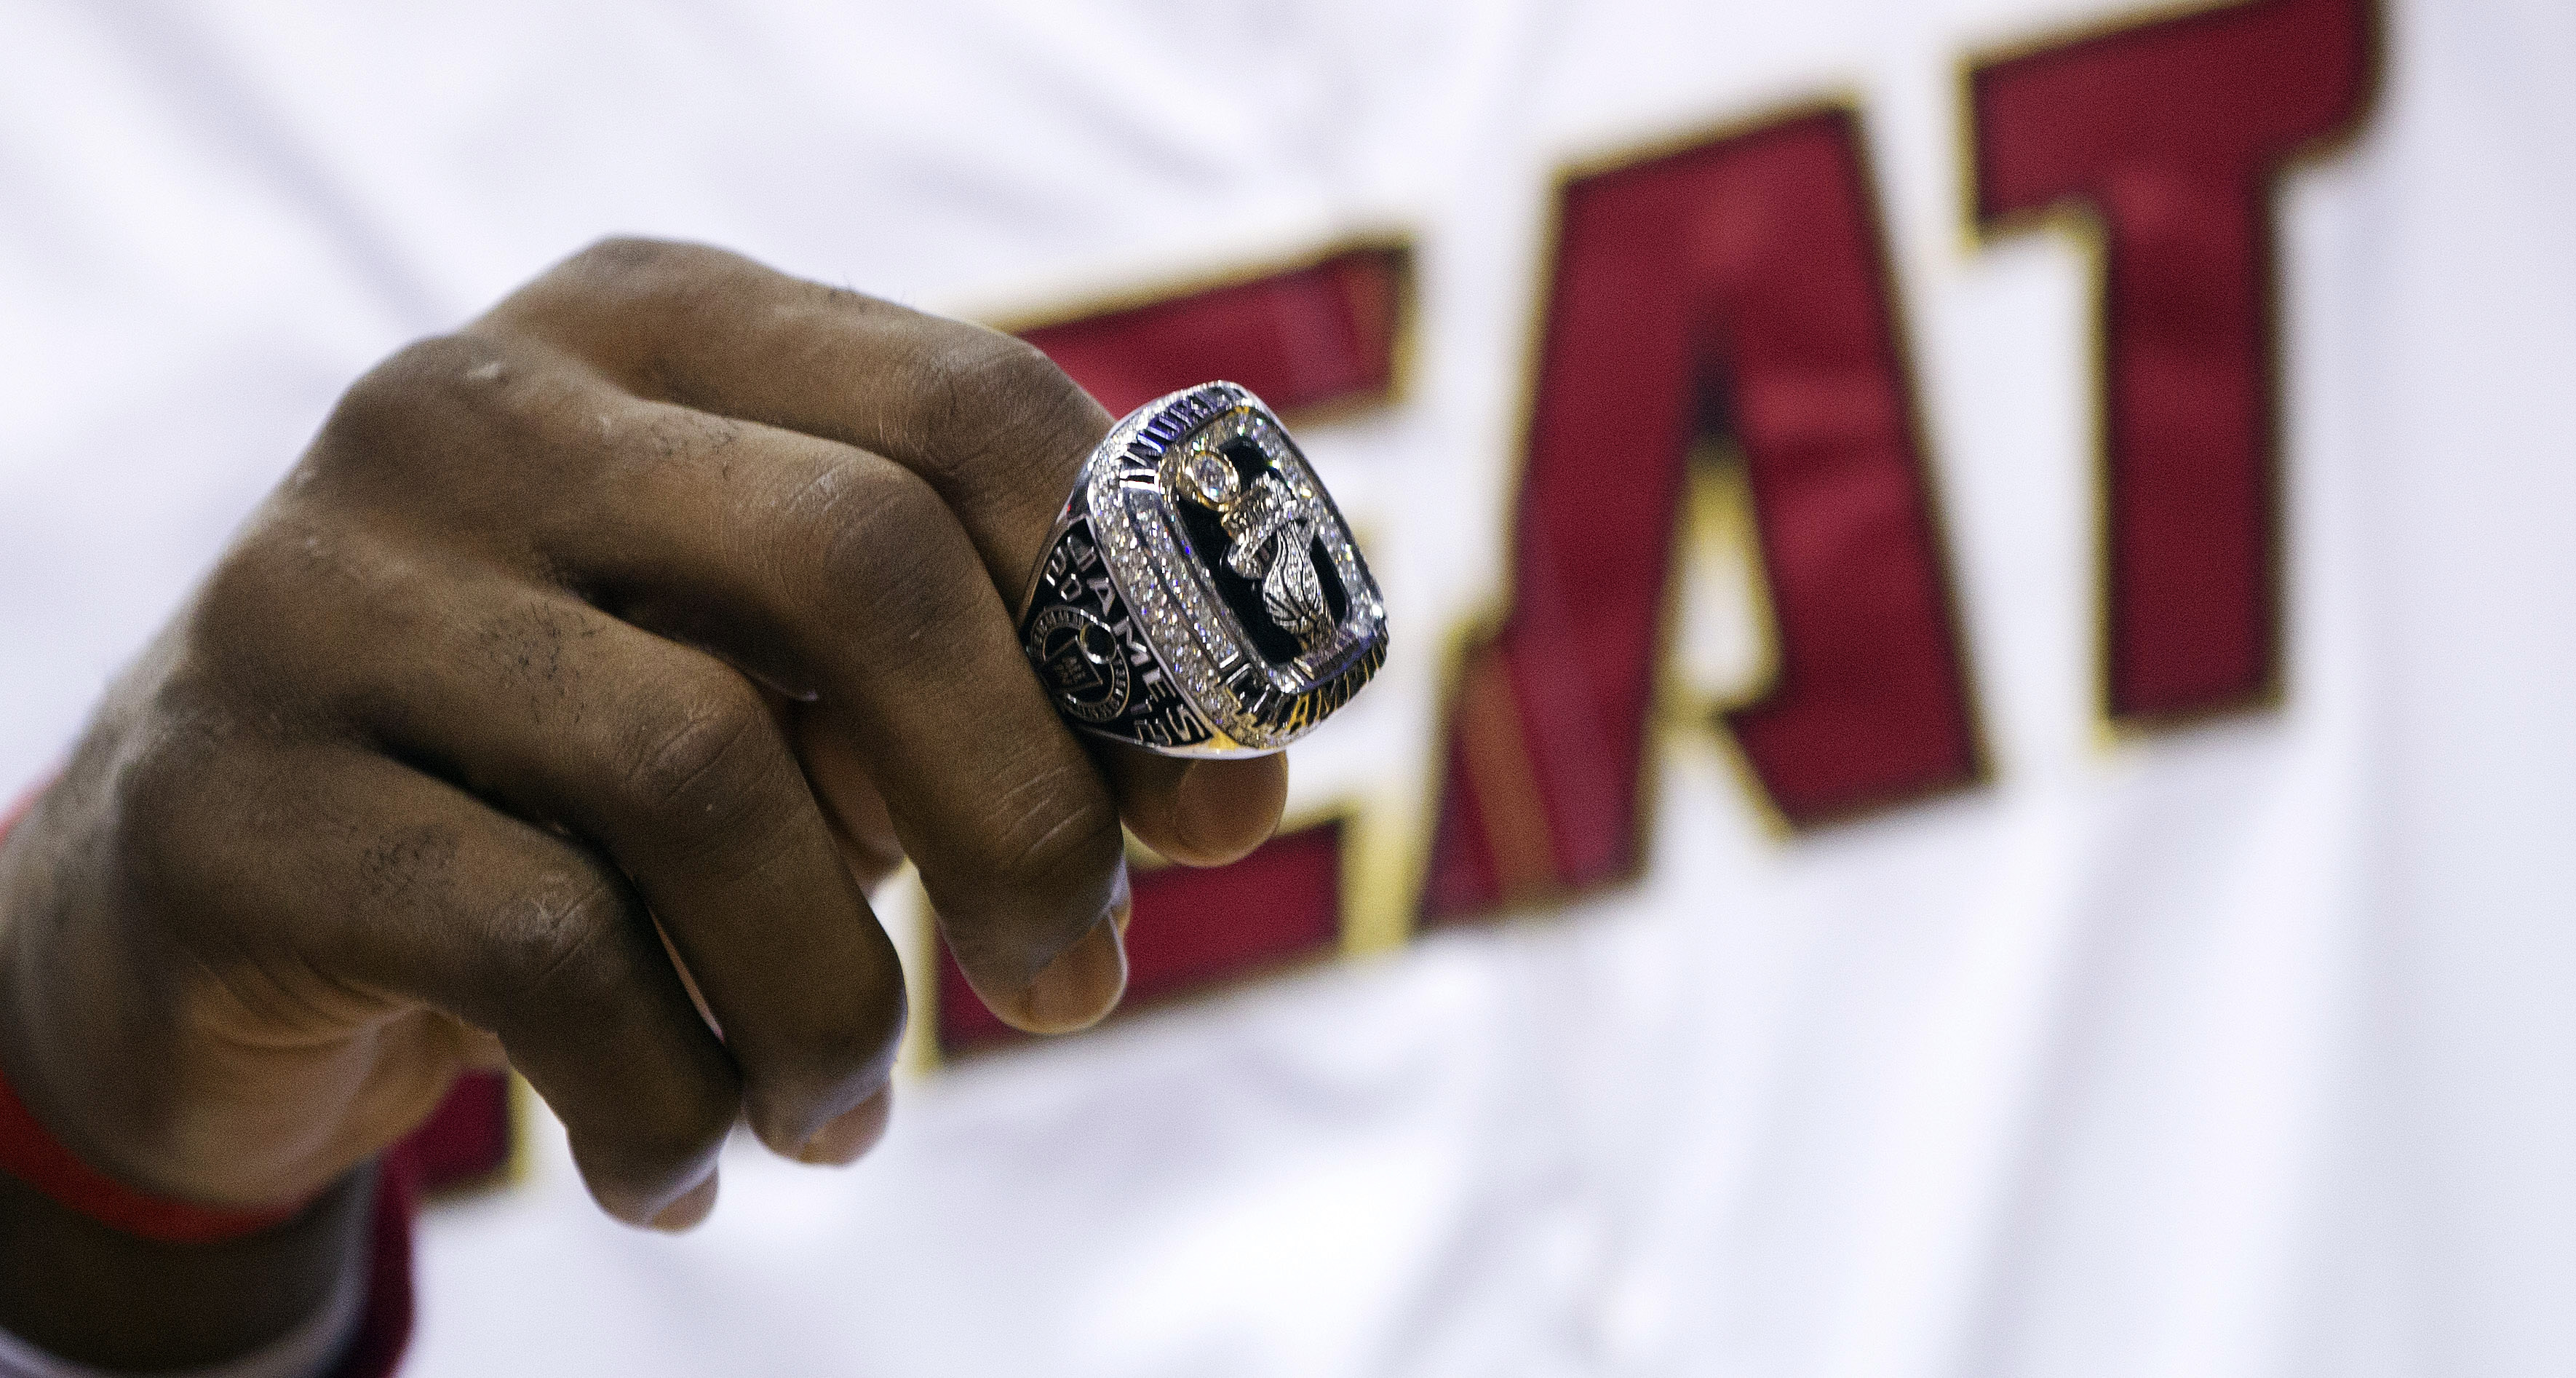 The Miami Heat's LeBron James already has two of these rings and will be keen to add a third when the NBA season gets underway on Tuesday. Photo: AP